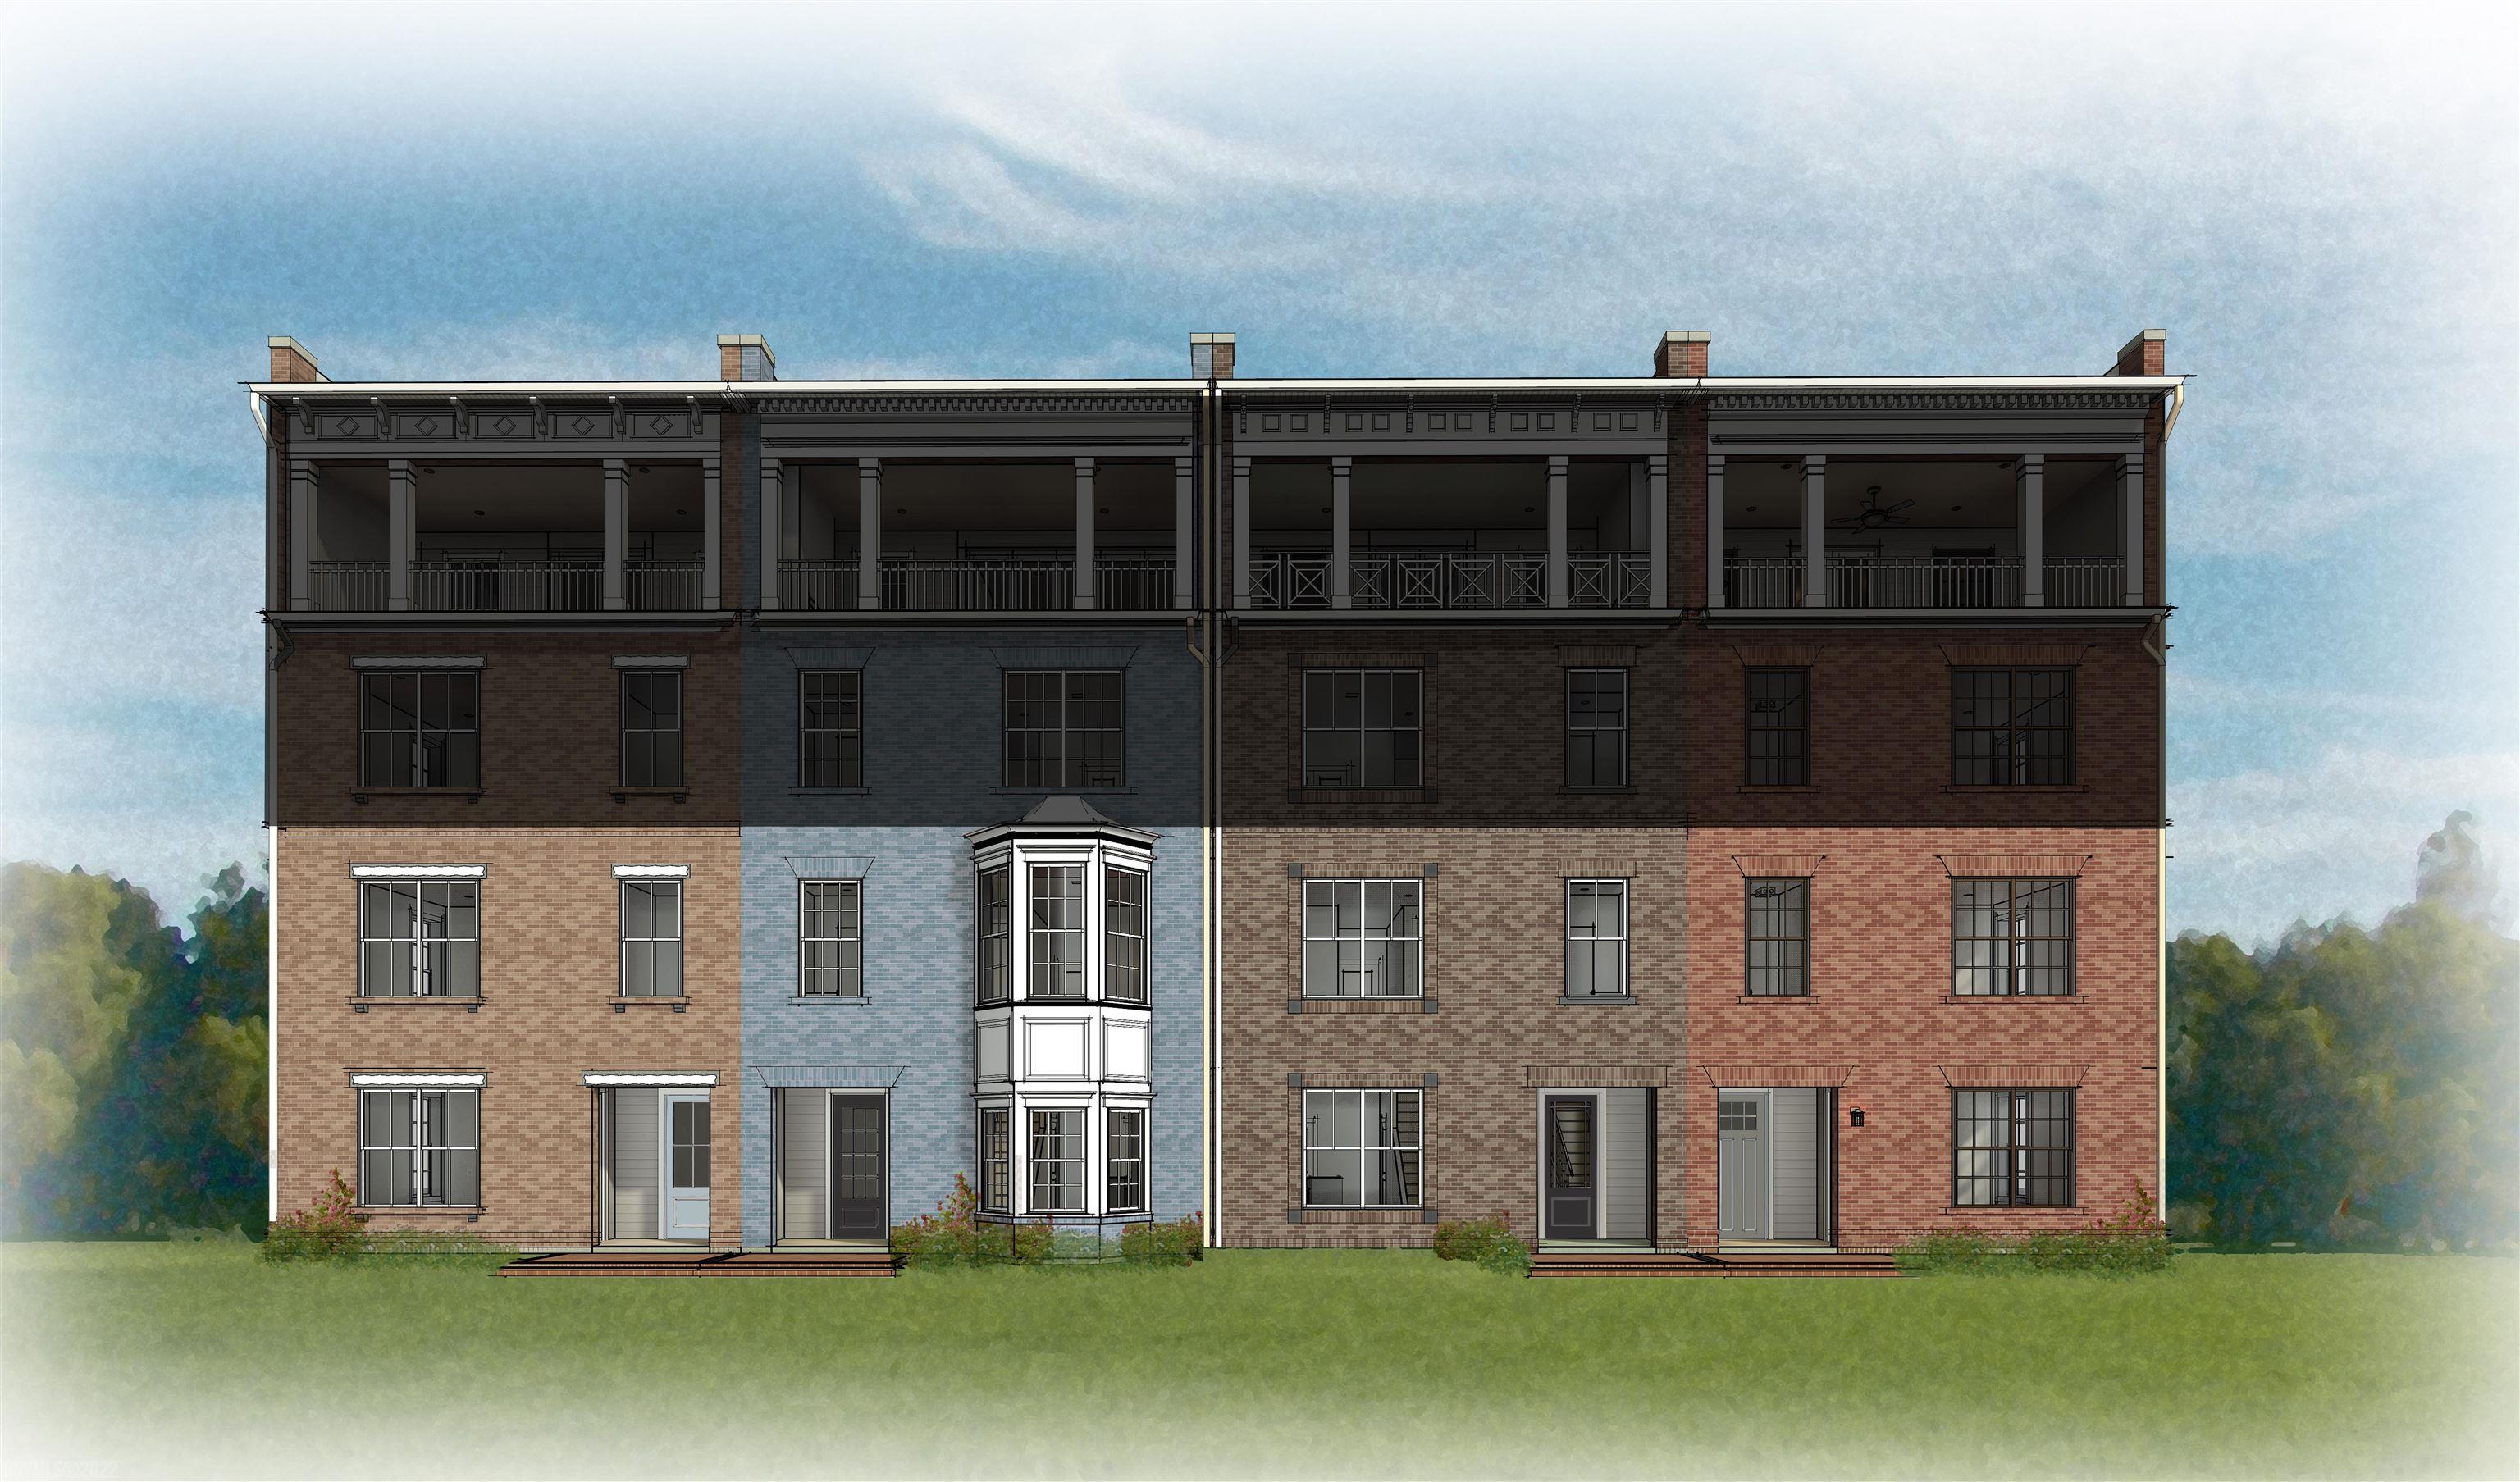 Introducing the new Arlington 2-level Condo in the new community of Midtown! Features 3 bedrooms, 2.5 baths, and main level entry with rear entry garage. Well appointed finishes throughout the home ALL within walking distance to downtown Blacksburg and Virginia Tech!